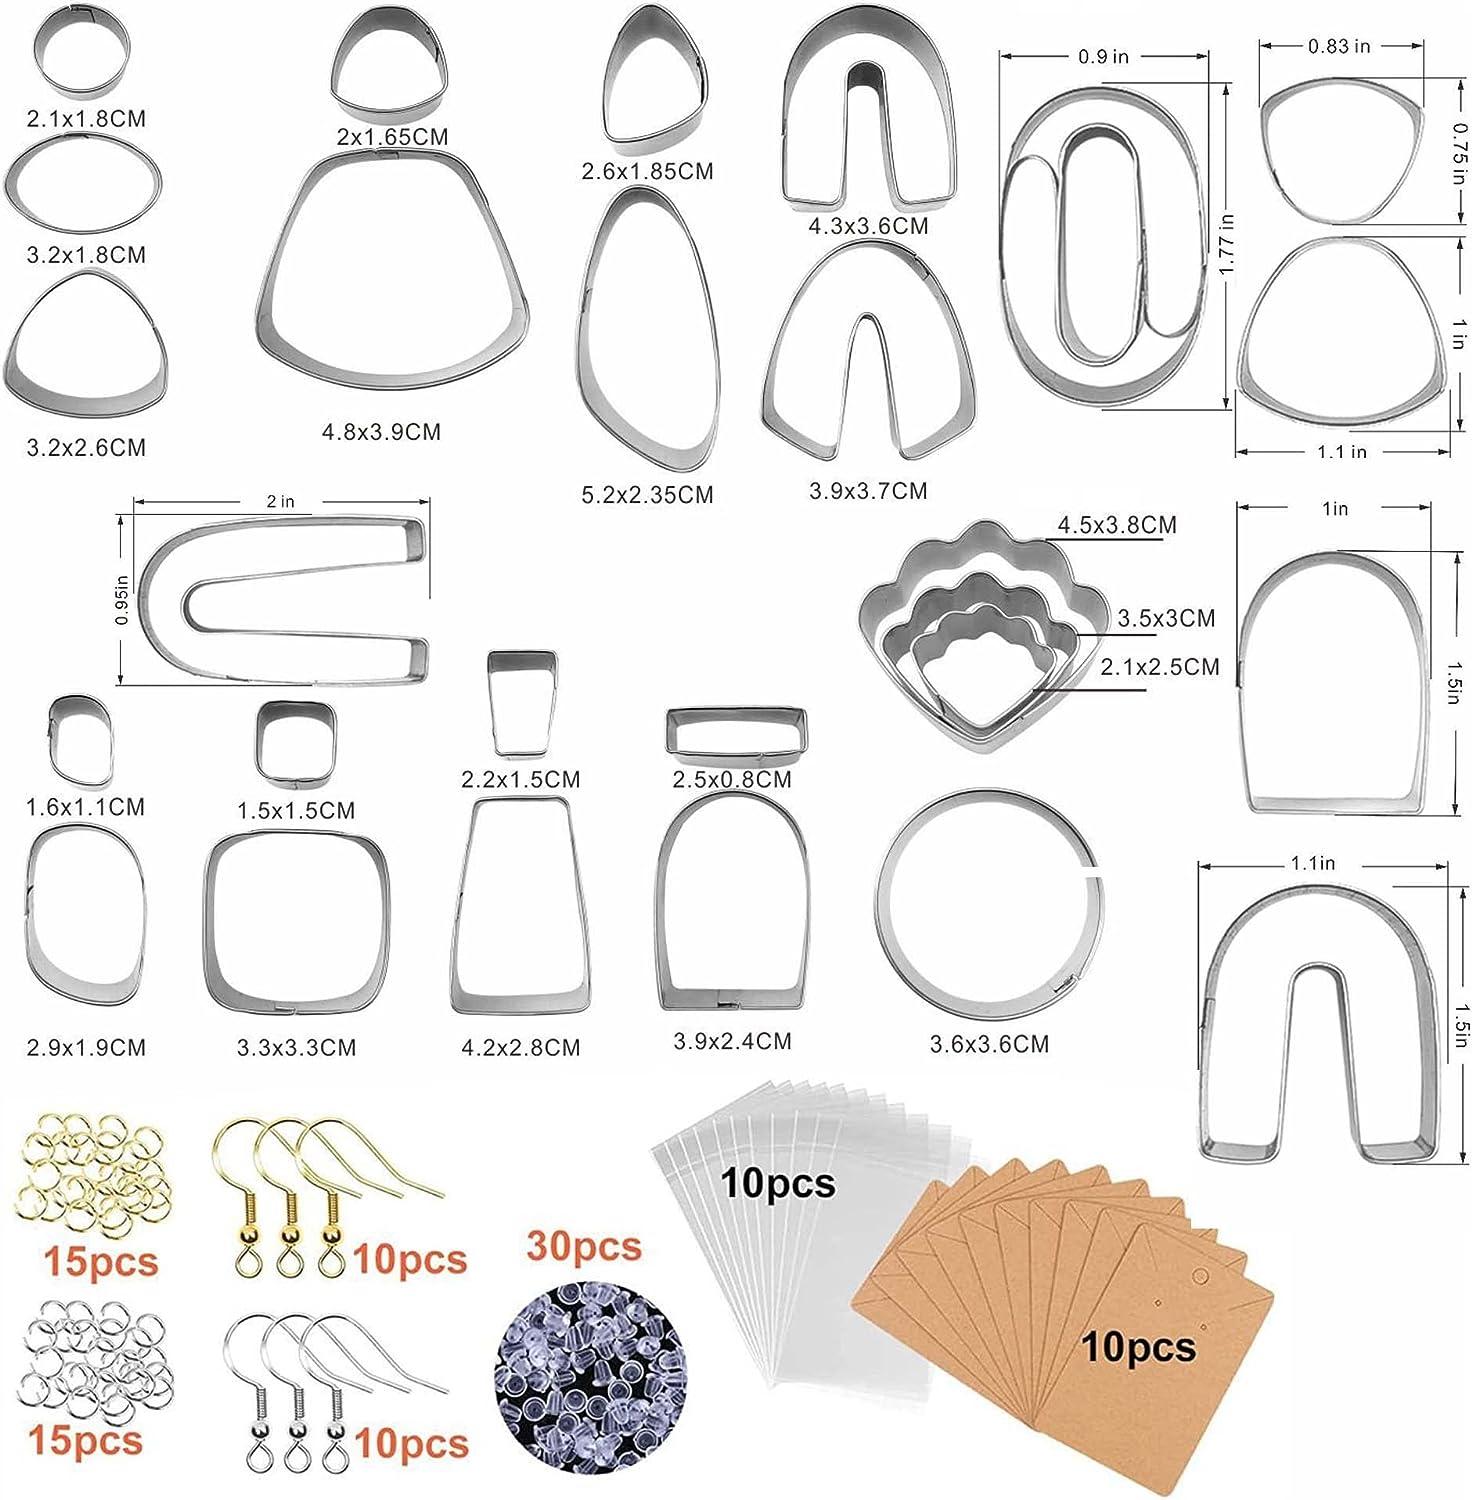 Apiemo 138 Pcs Polymer Clay Cutters Set Classic Shapes Clay Earring Cutters  Molds for Polymer Clay Earring Jewelry Making with Earring Cards Bag  Earring Hooks Jump Rings M1